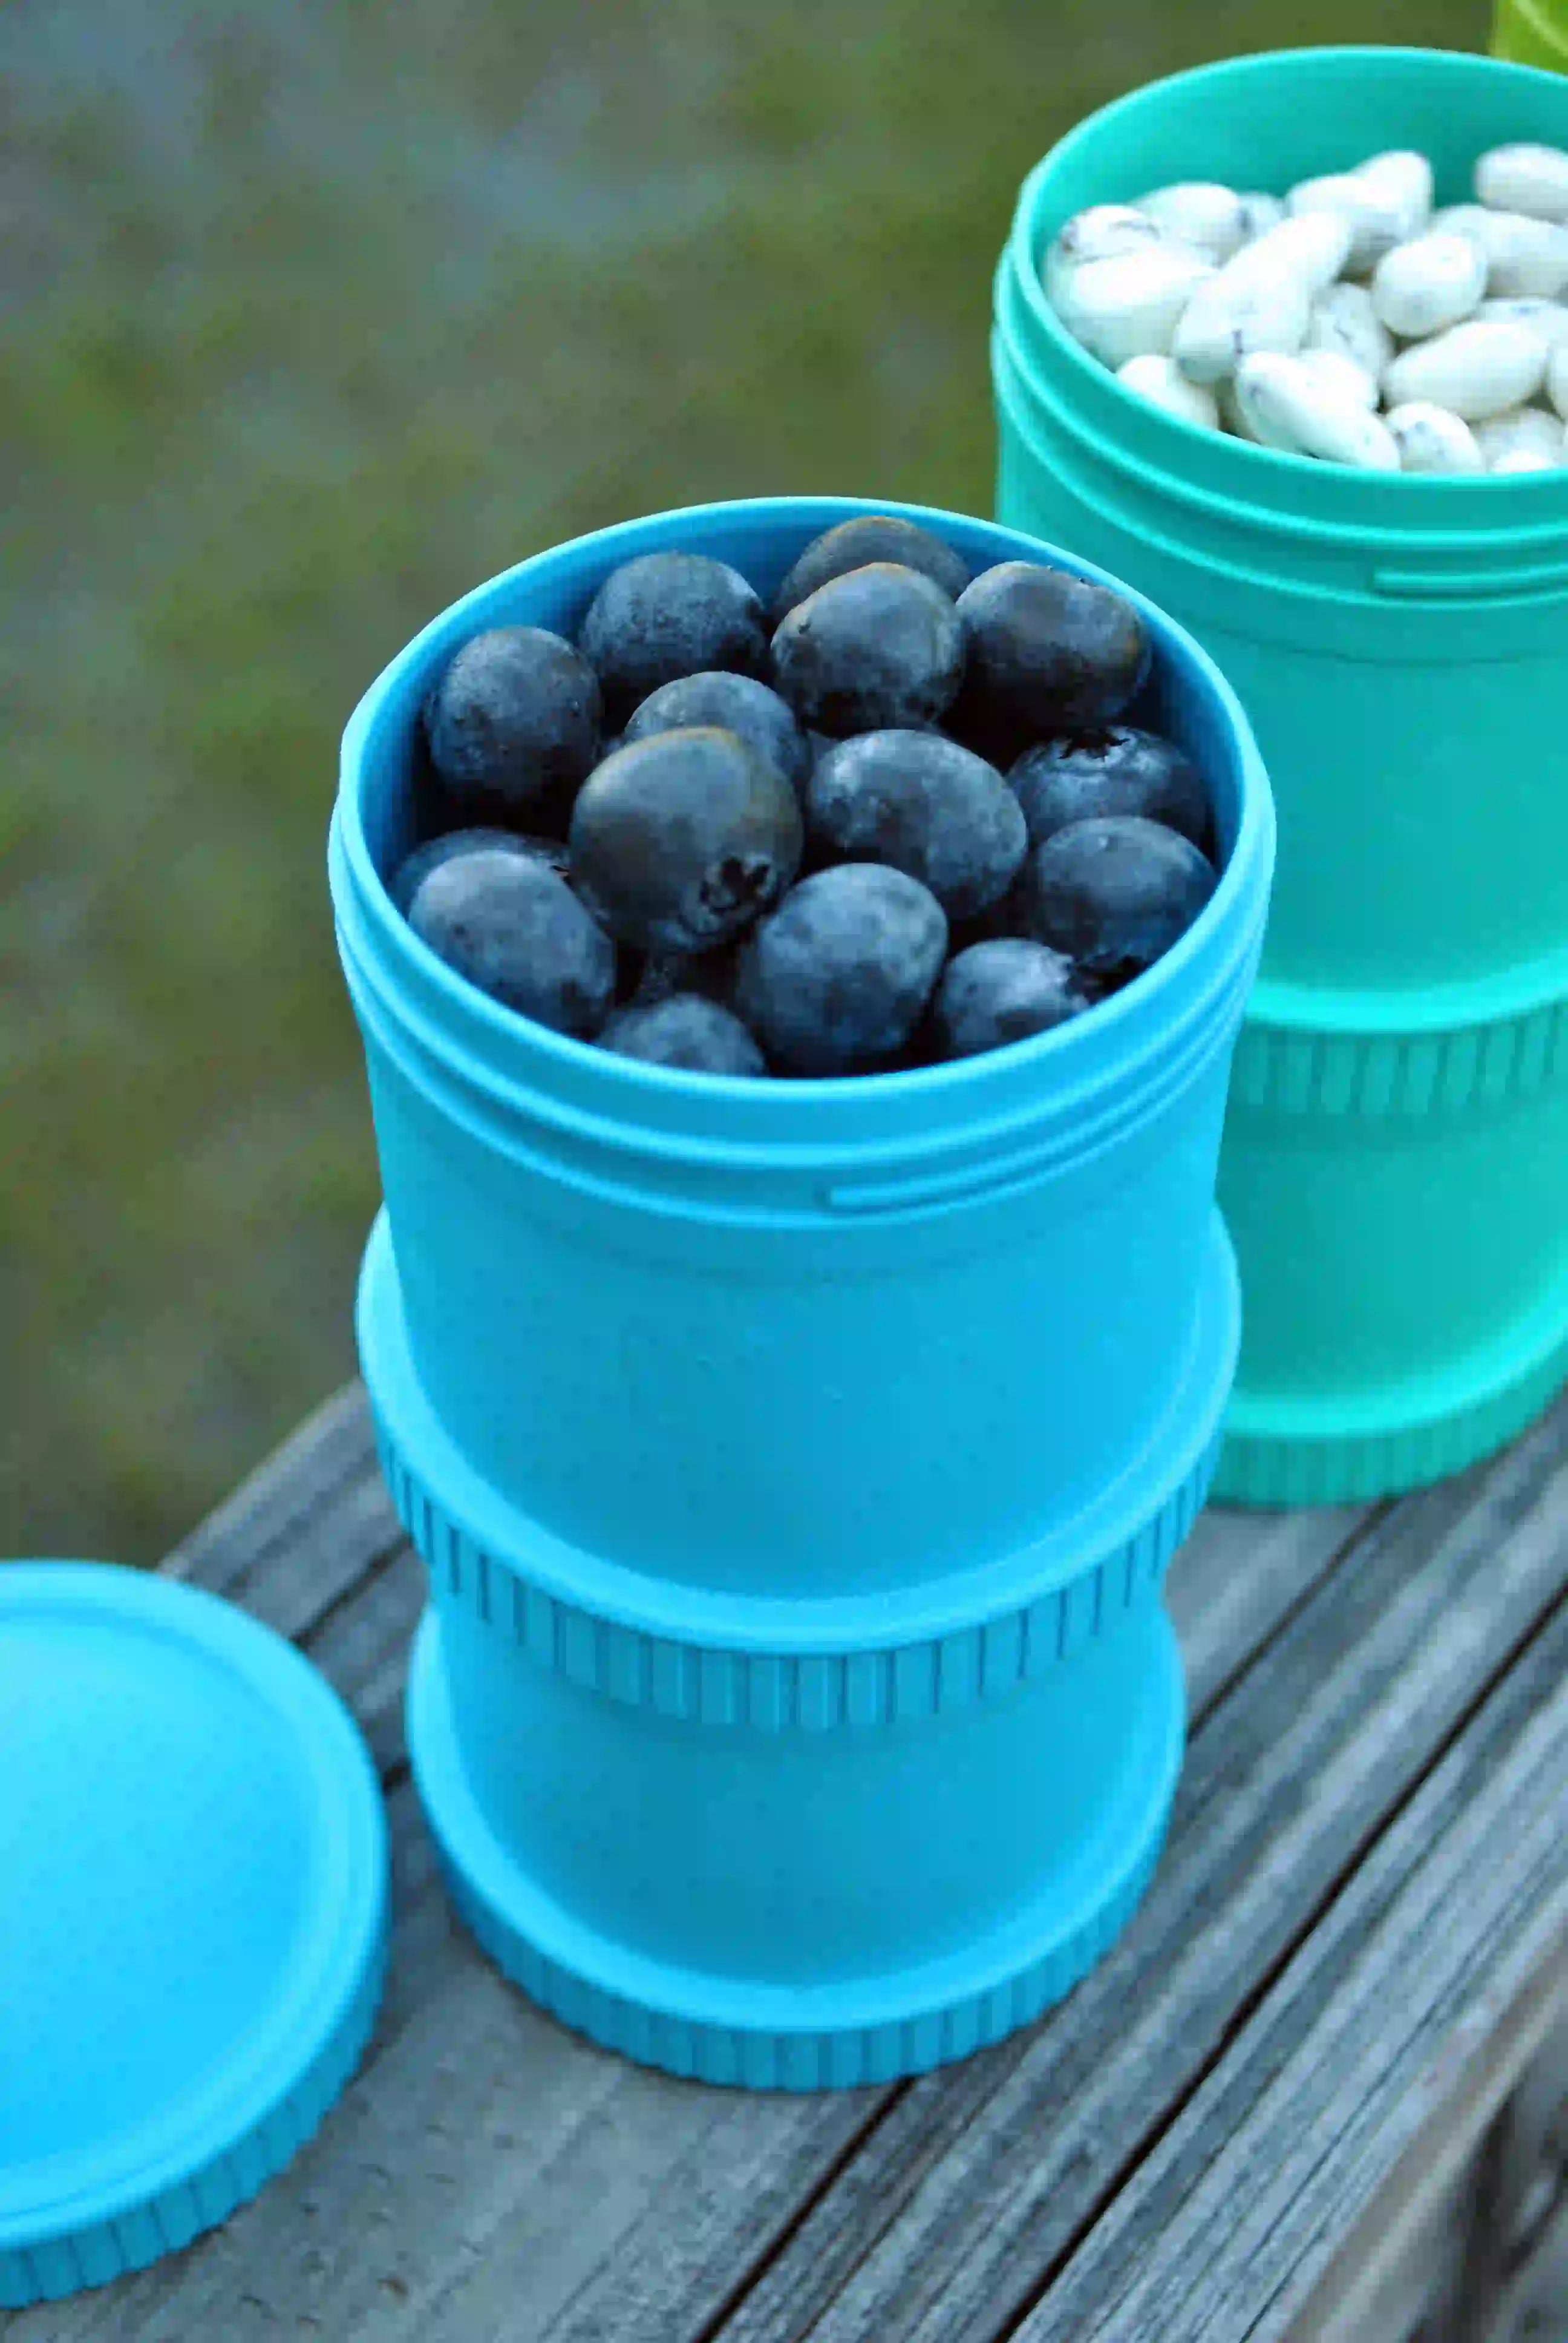 Re-Play Snack Stack (Blue)